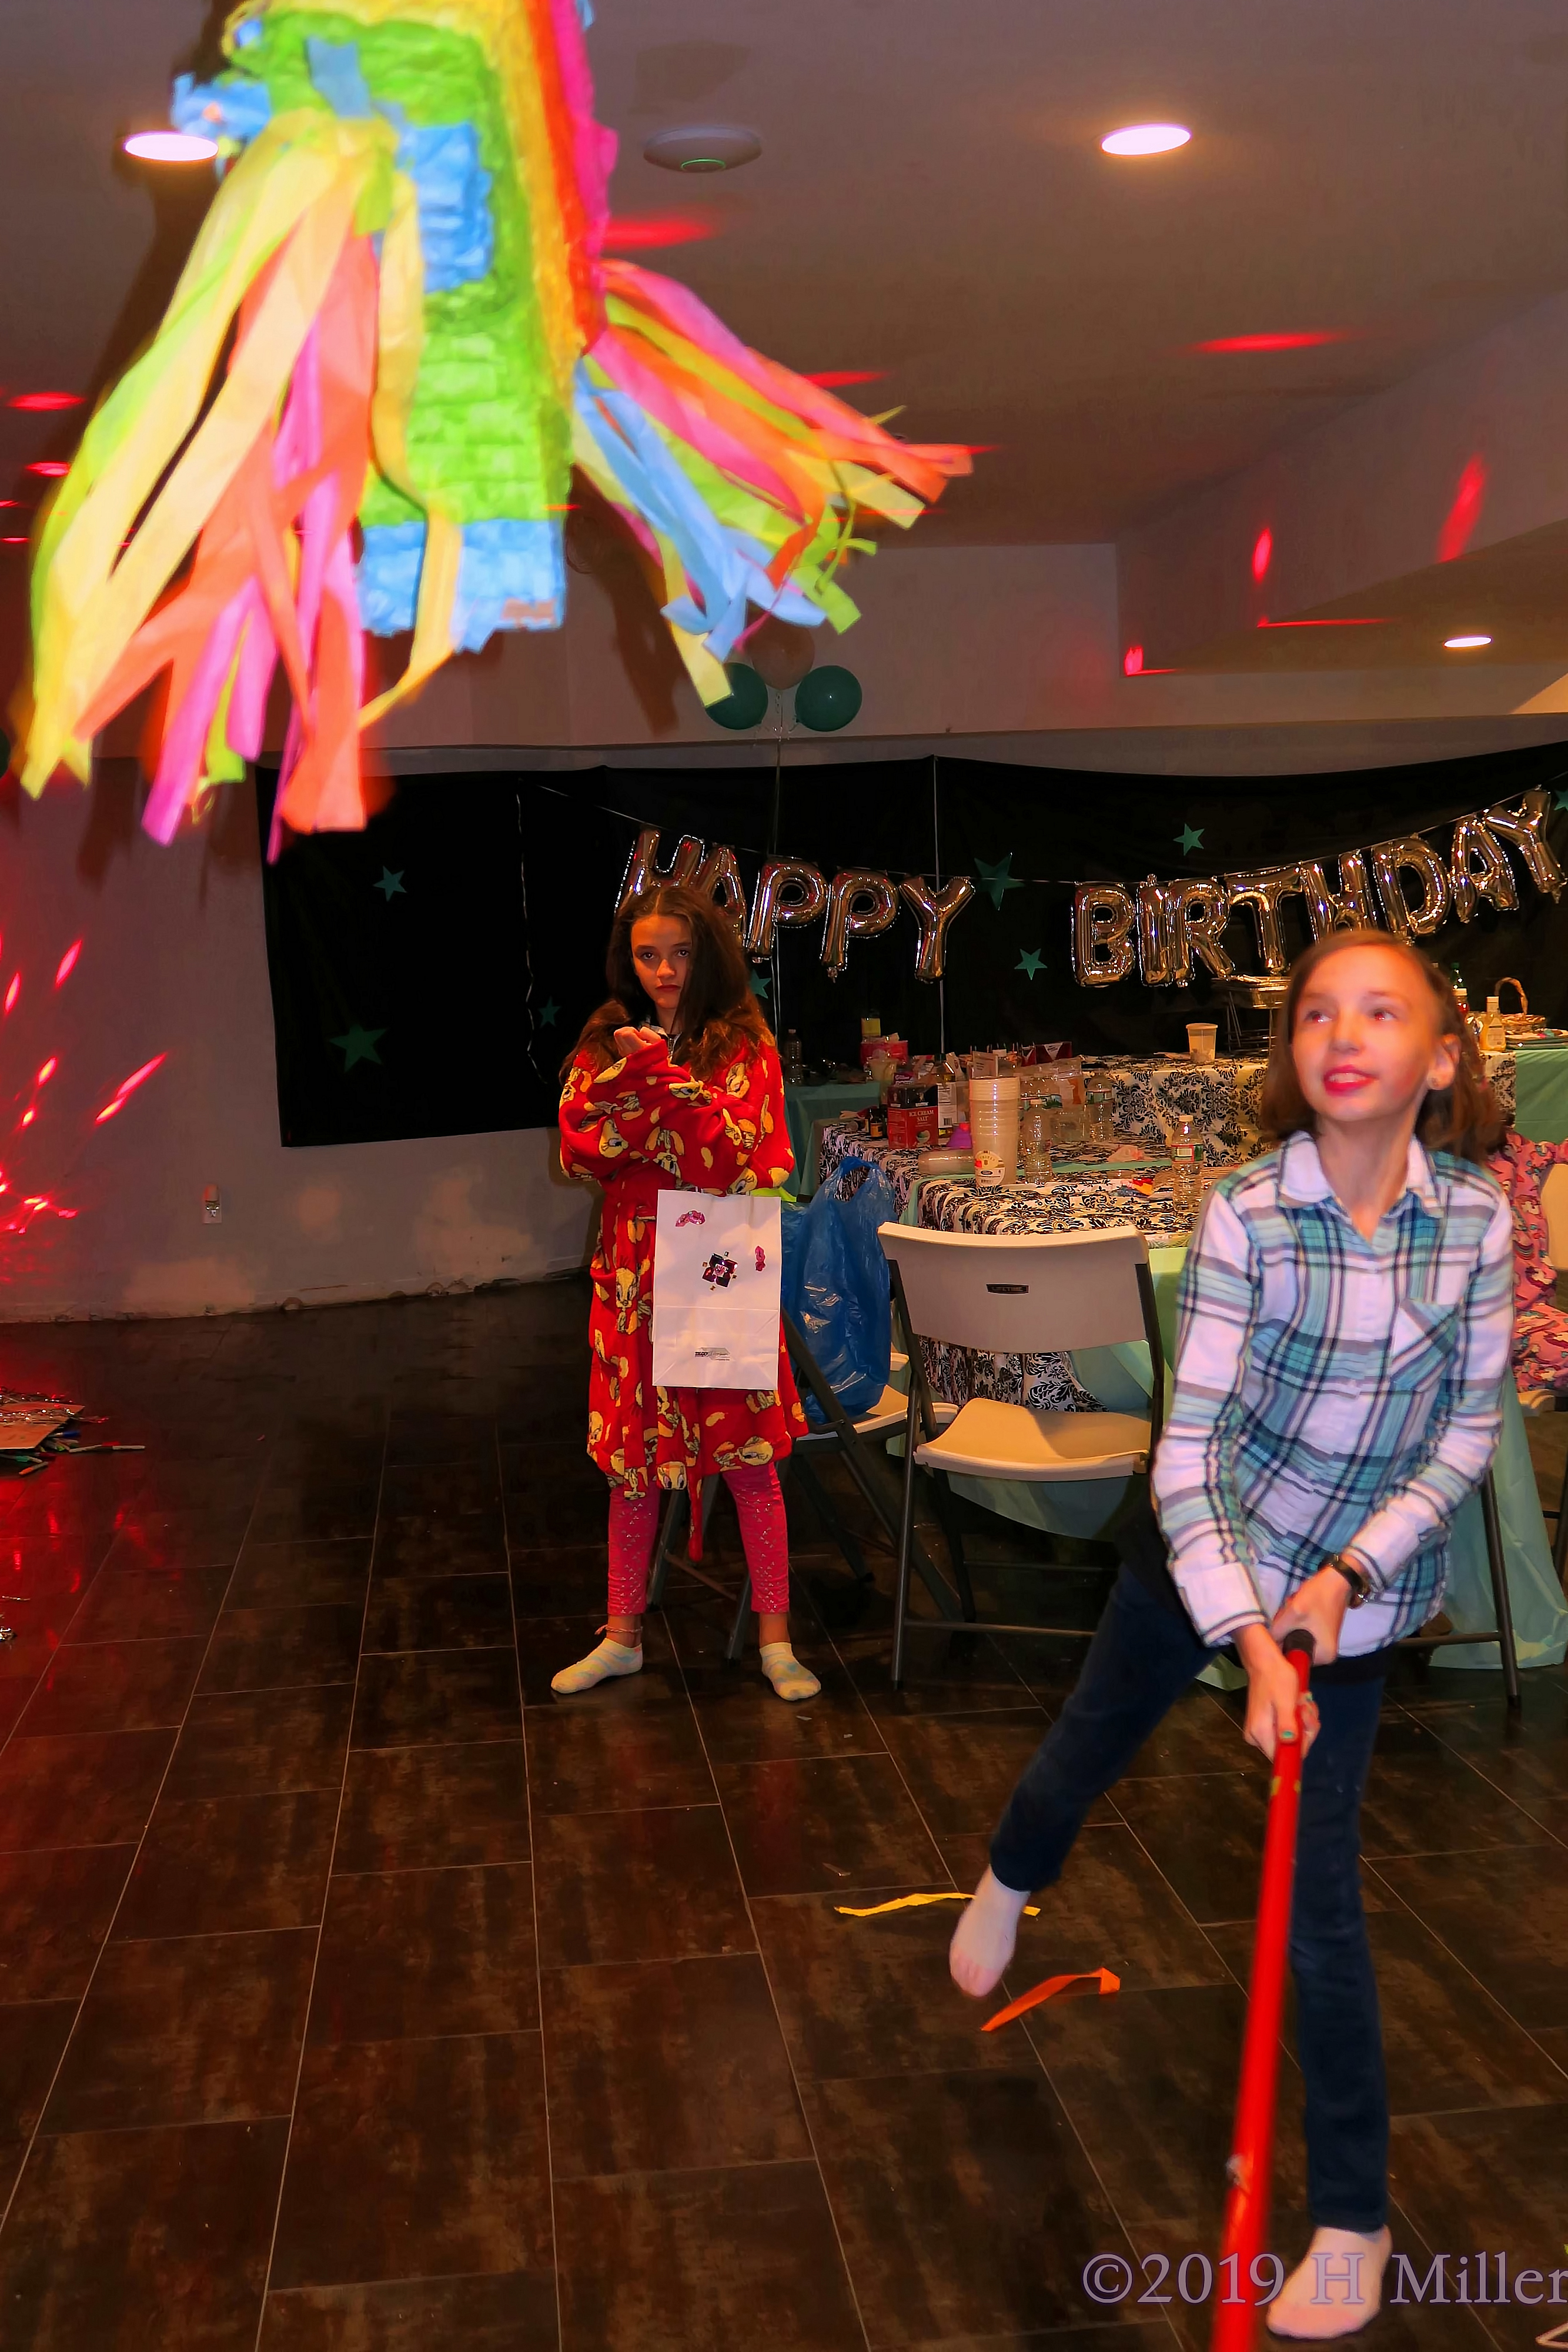 Seeing Stars And Flashing Lights On The Ceiling! Pinata Fun At The Kids Party! 